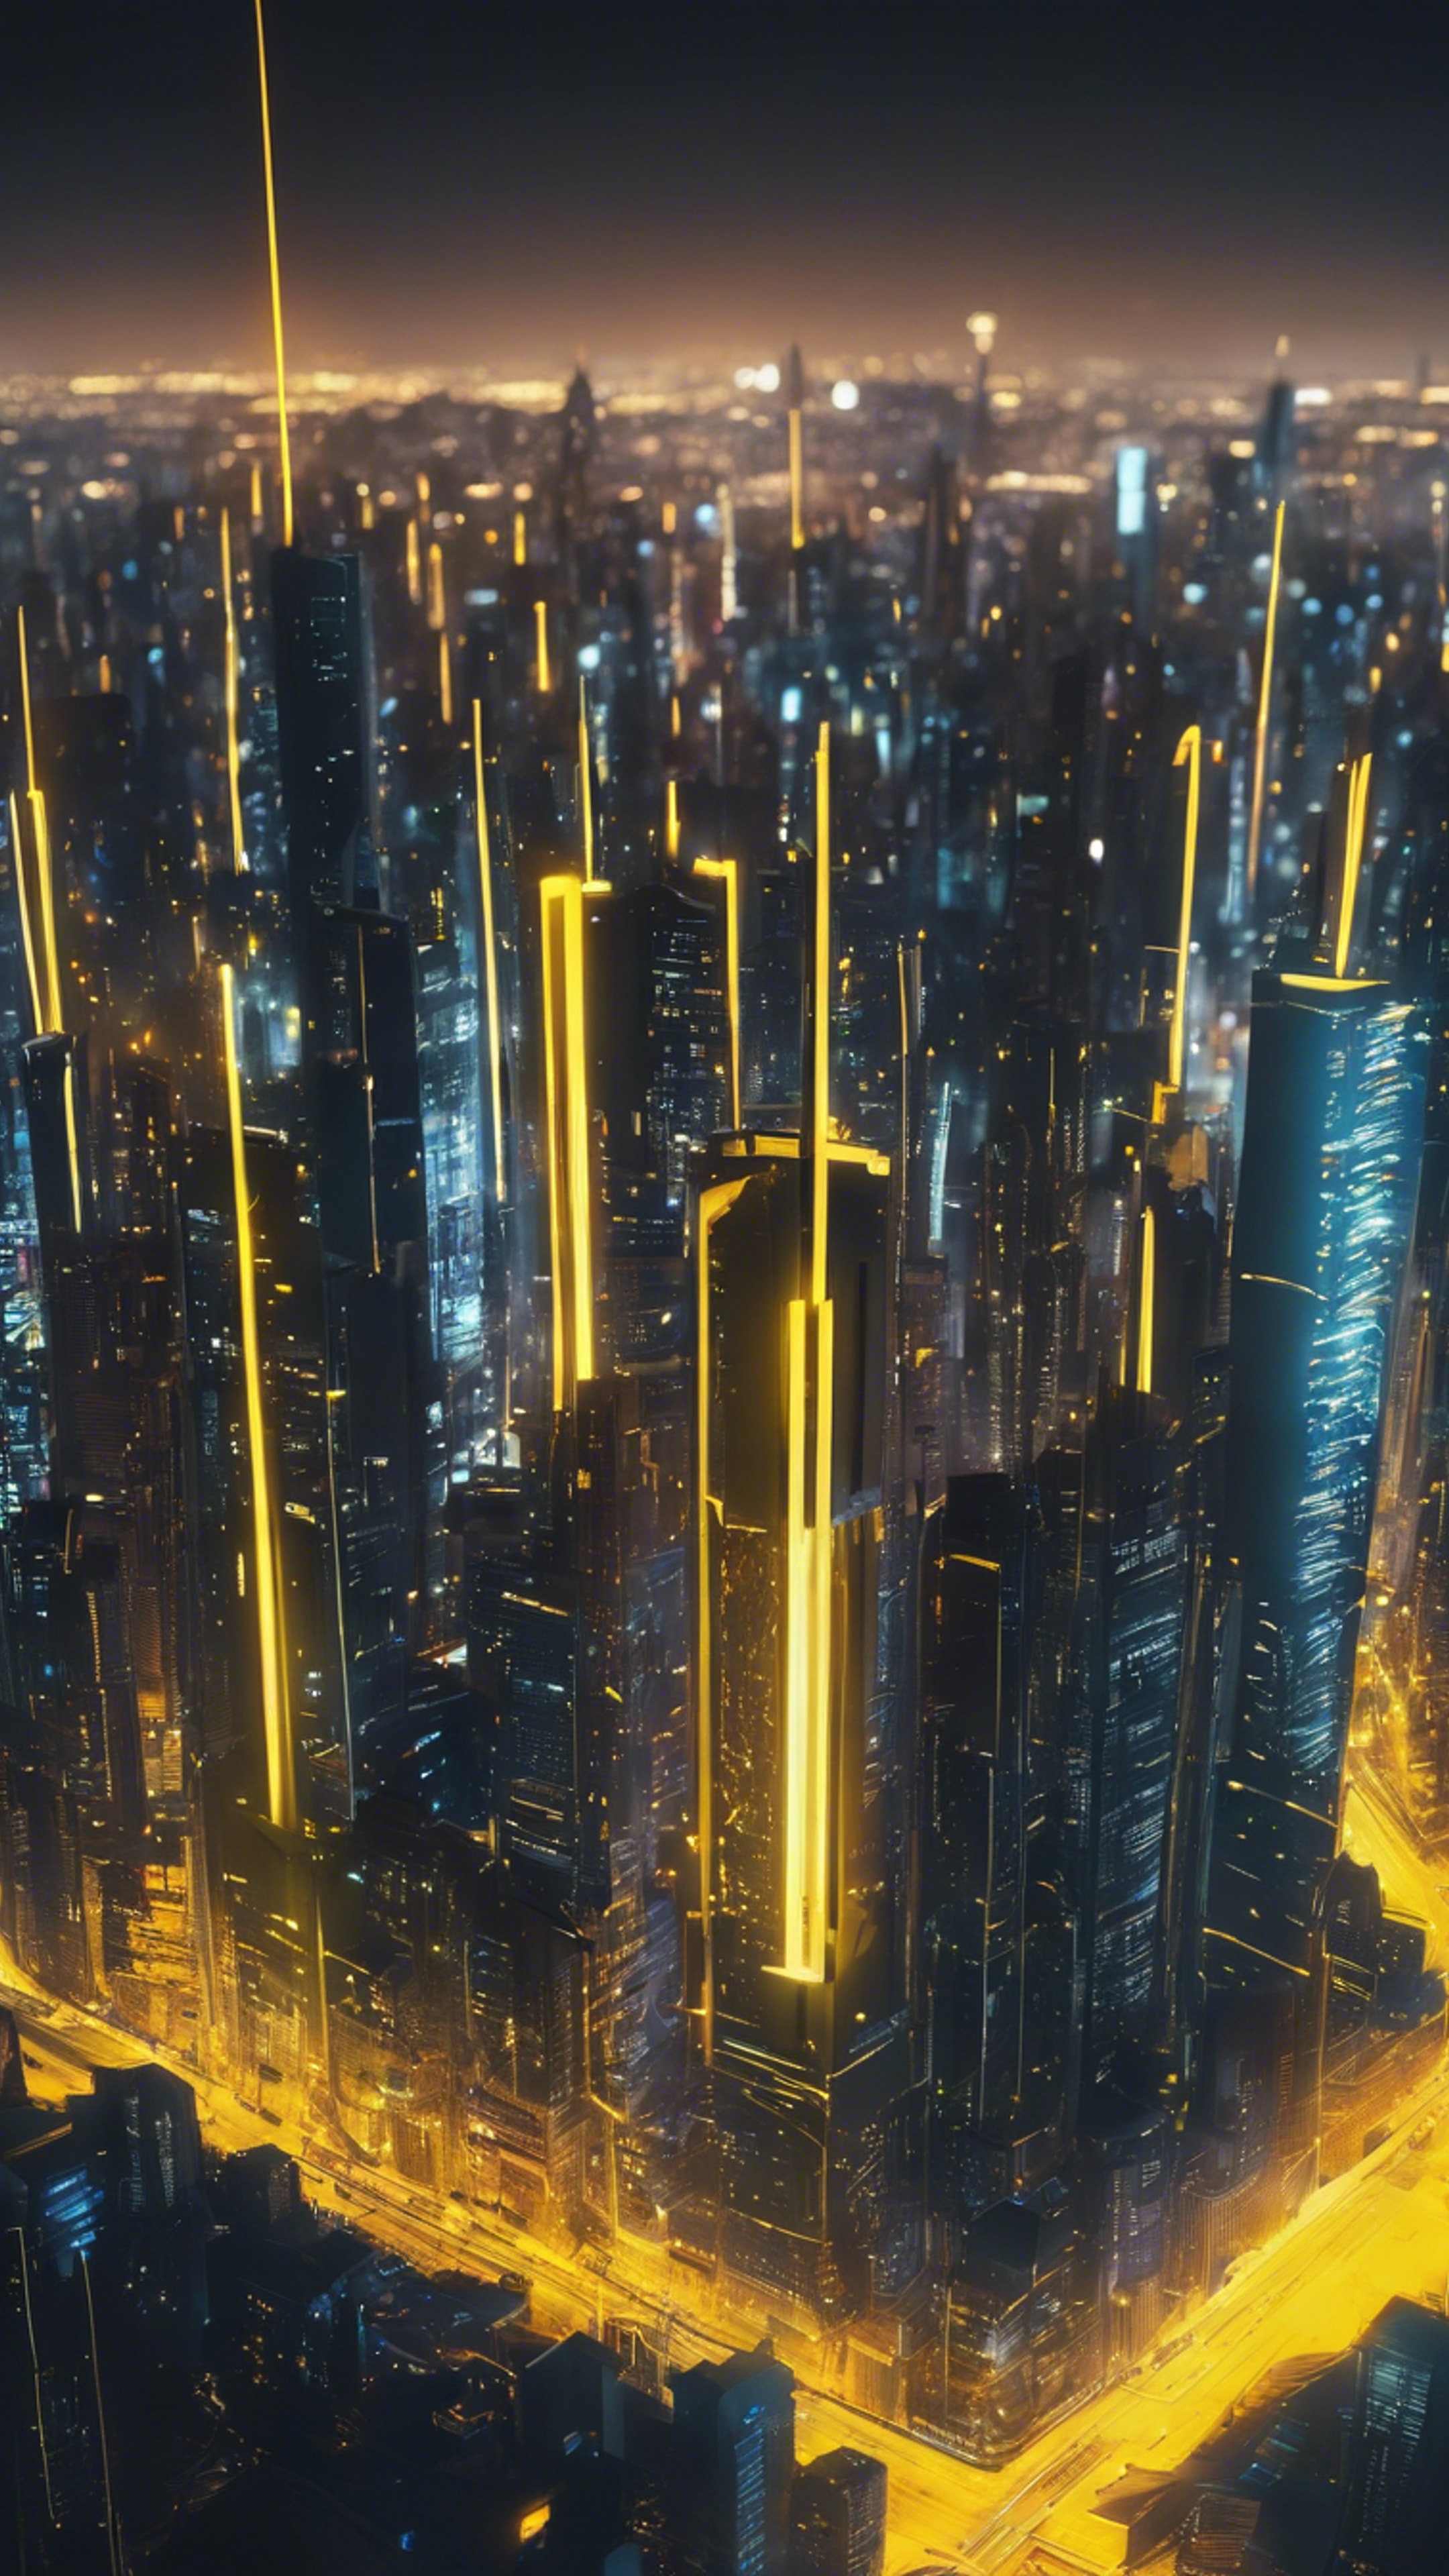 A towering futuristic cityscape highlighted by neon yellow lights under the night sky. Wallpaper[c2e95164cc7d435ab04c]